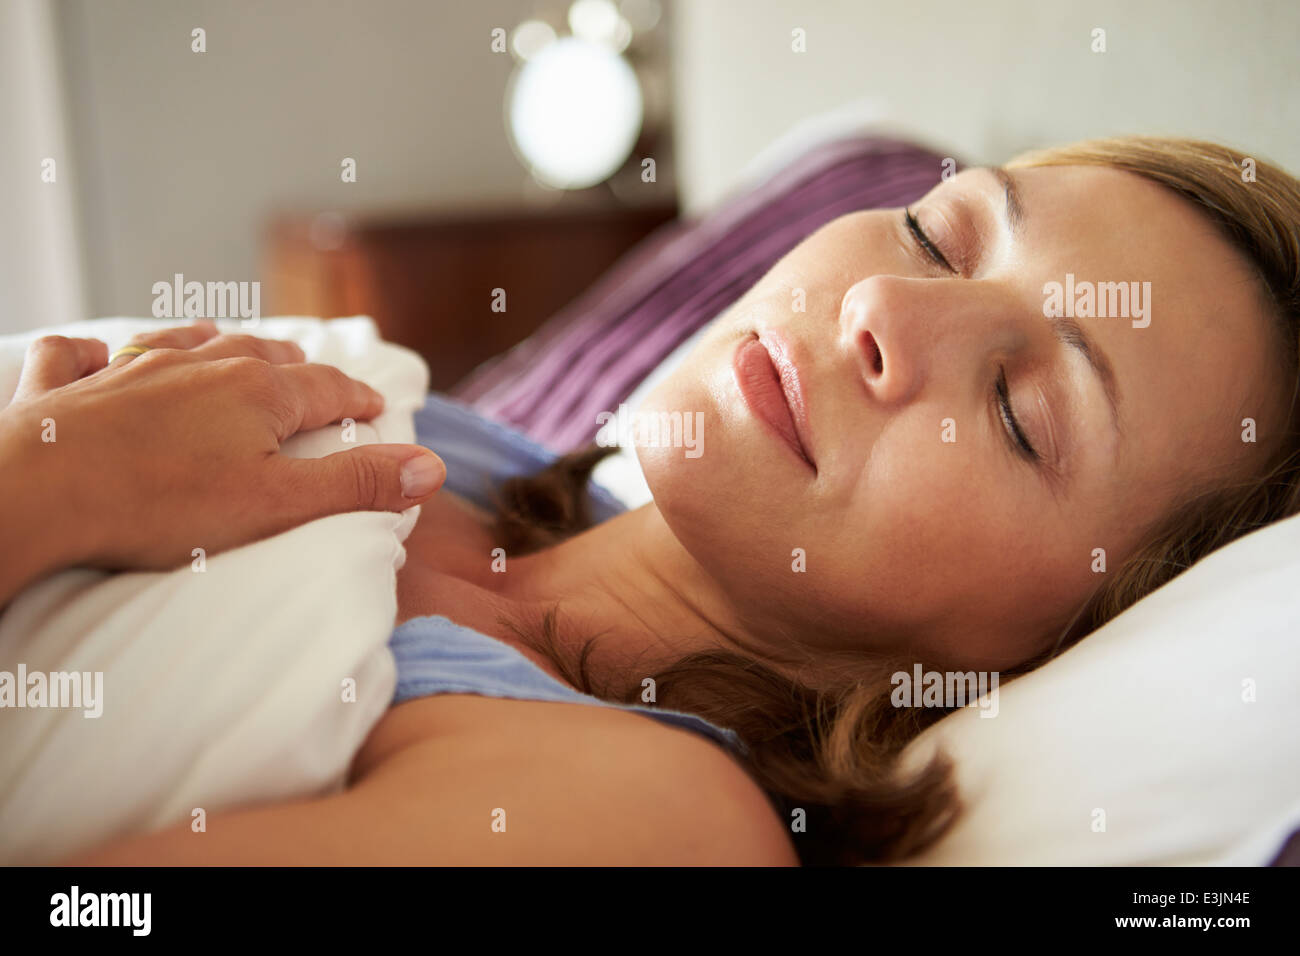 Attractive Middle Aged Woman Asleep In Bed Stock Photo